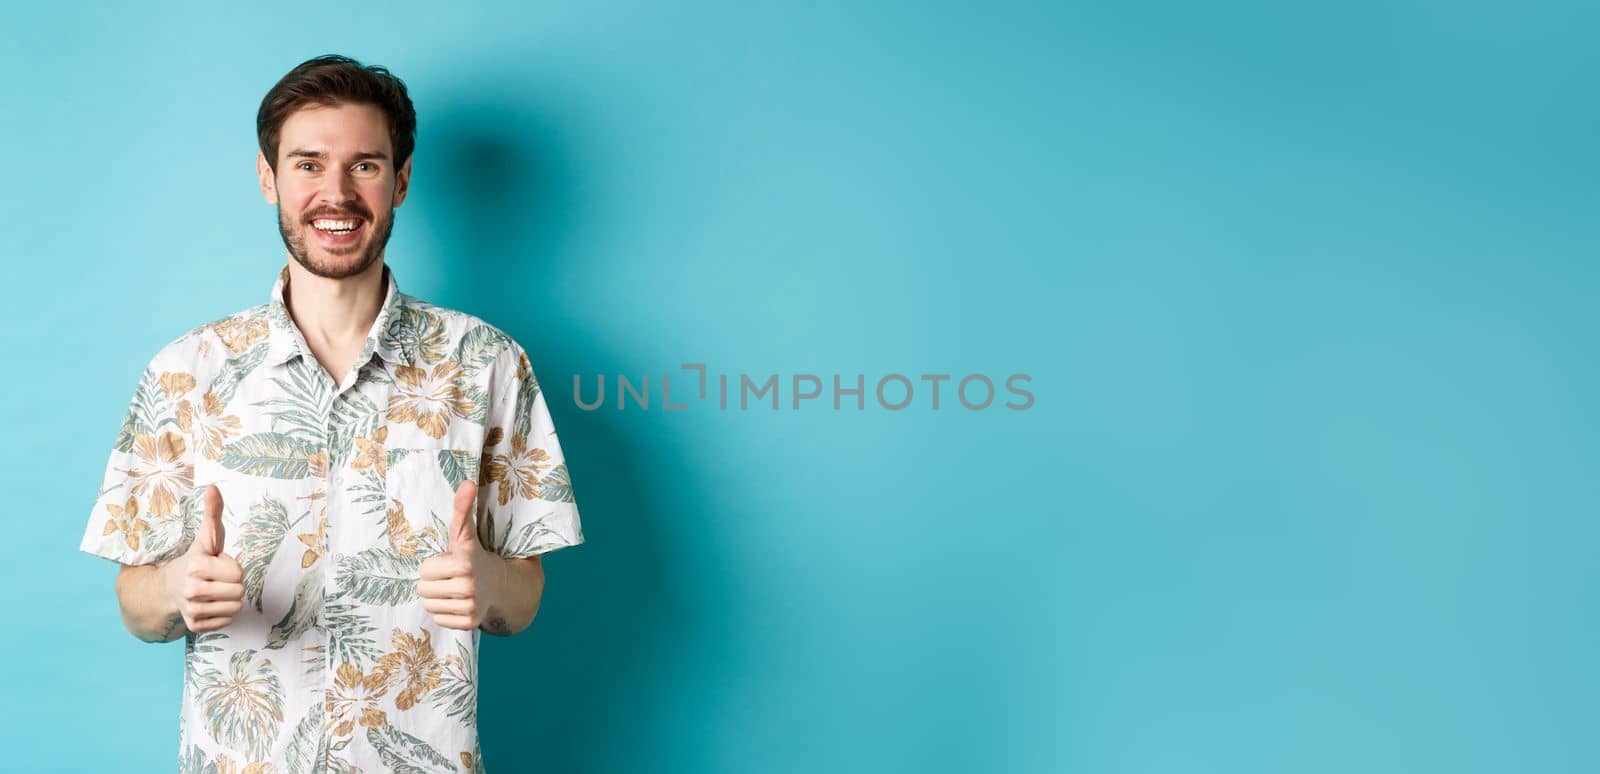 Summer holiday. Happy tourist showing thumbs up in approval and smiling, wearing hawaiian shirt, recommending travel agency, blue background.